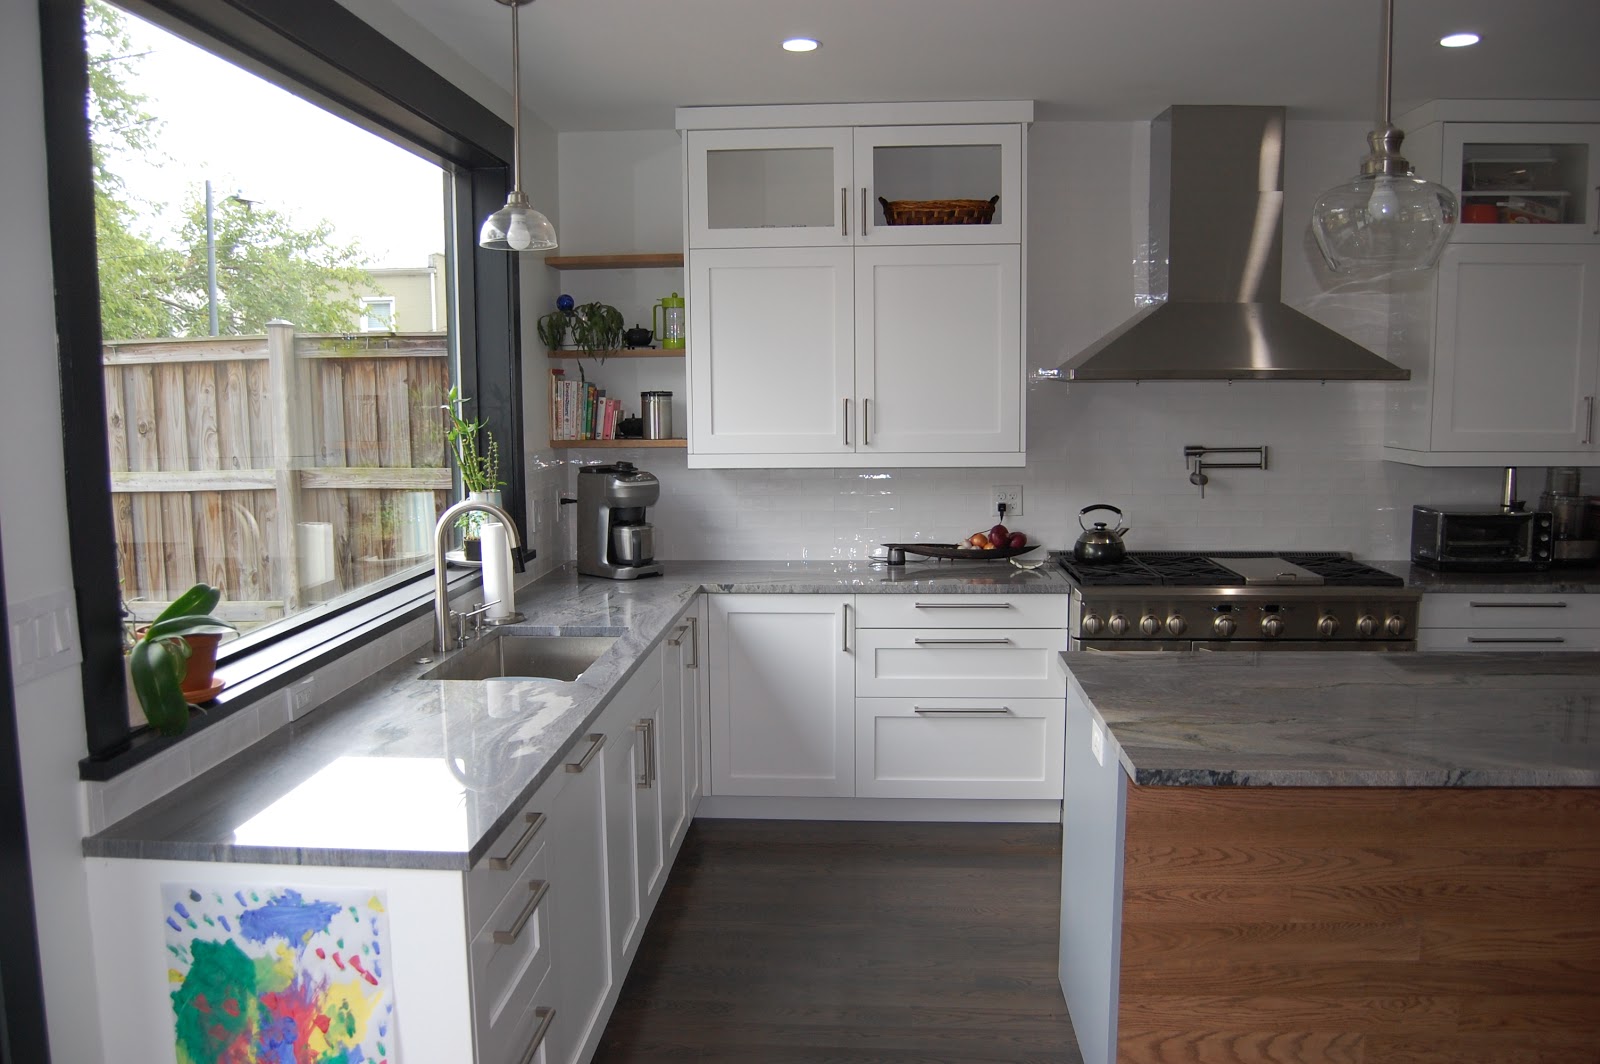 A Luxurious IKEA Kitchen Renovation + 3 Important Lessons